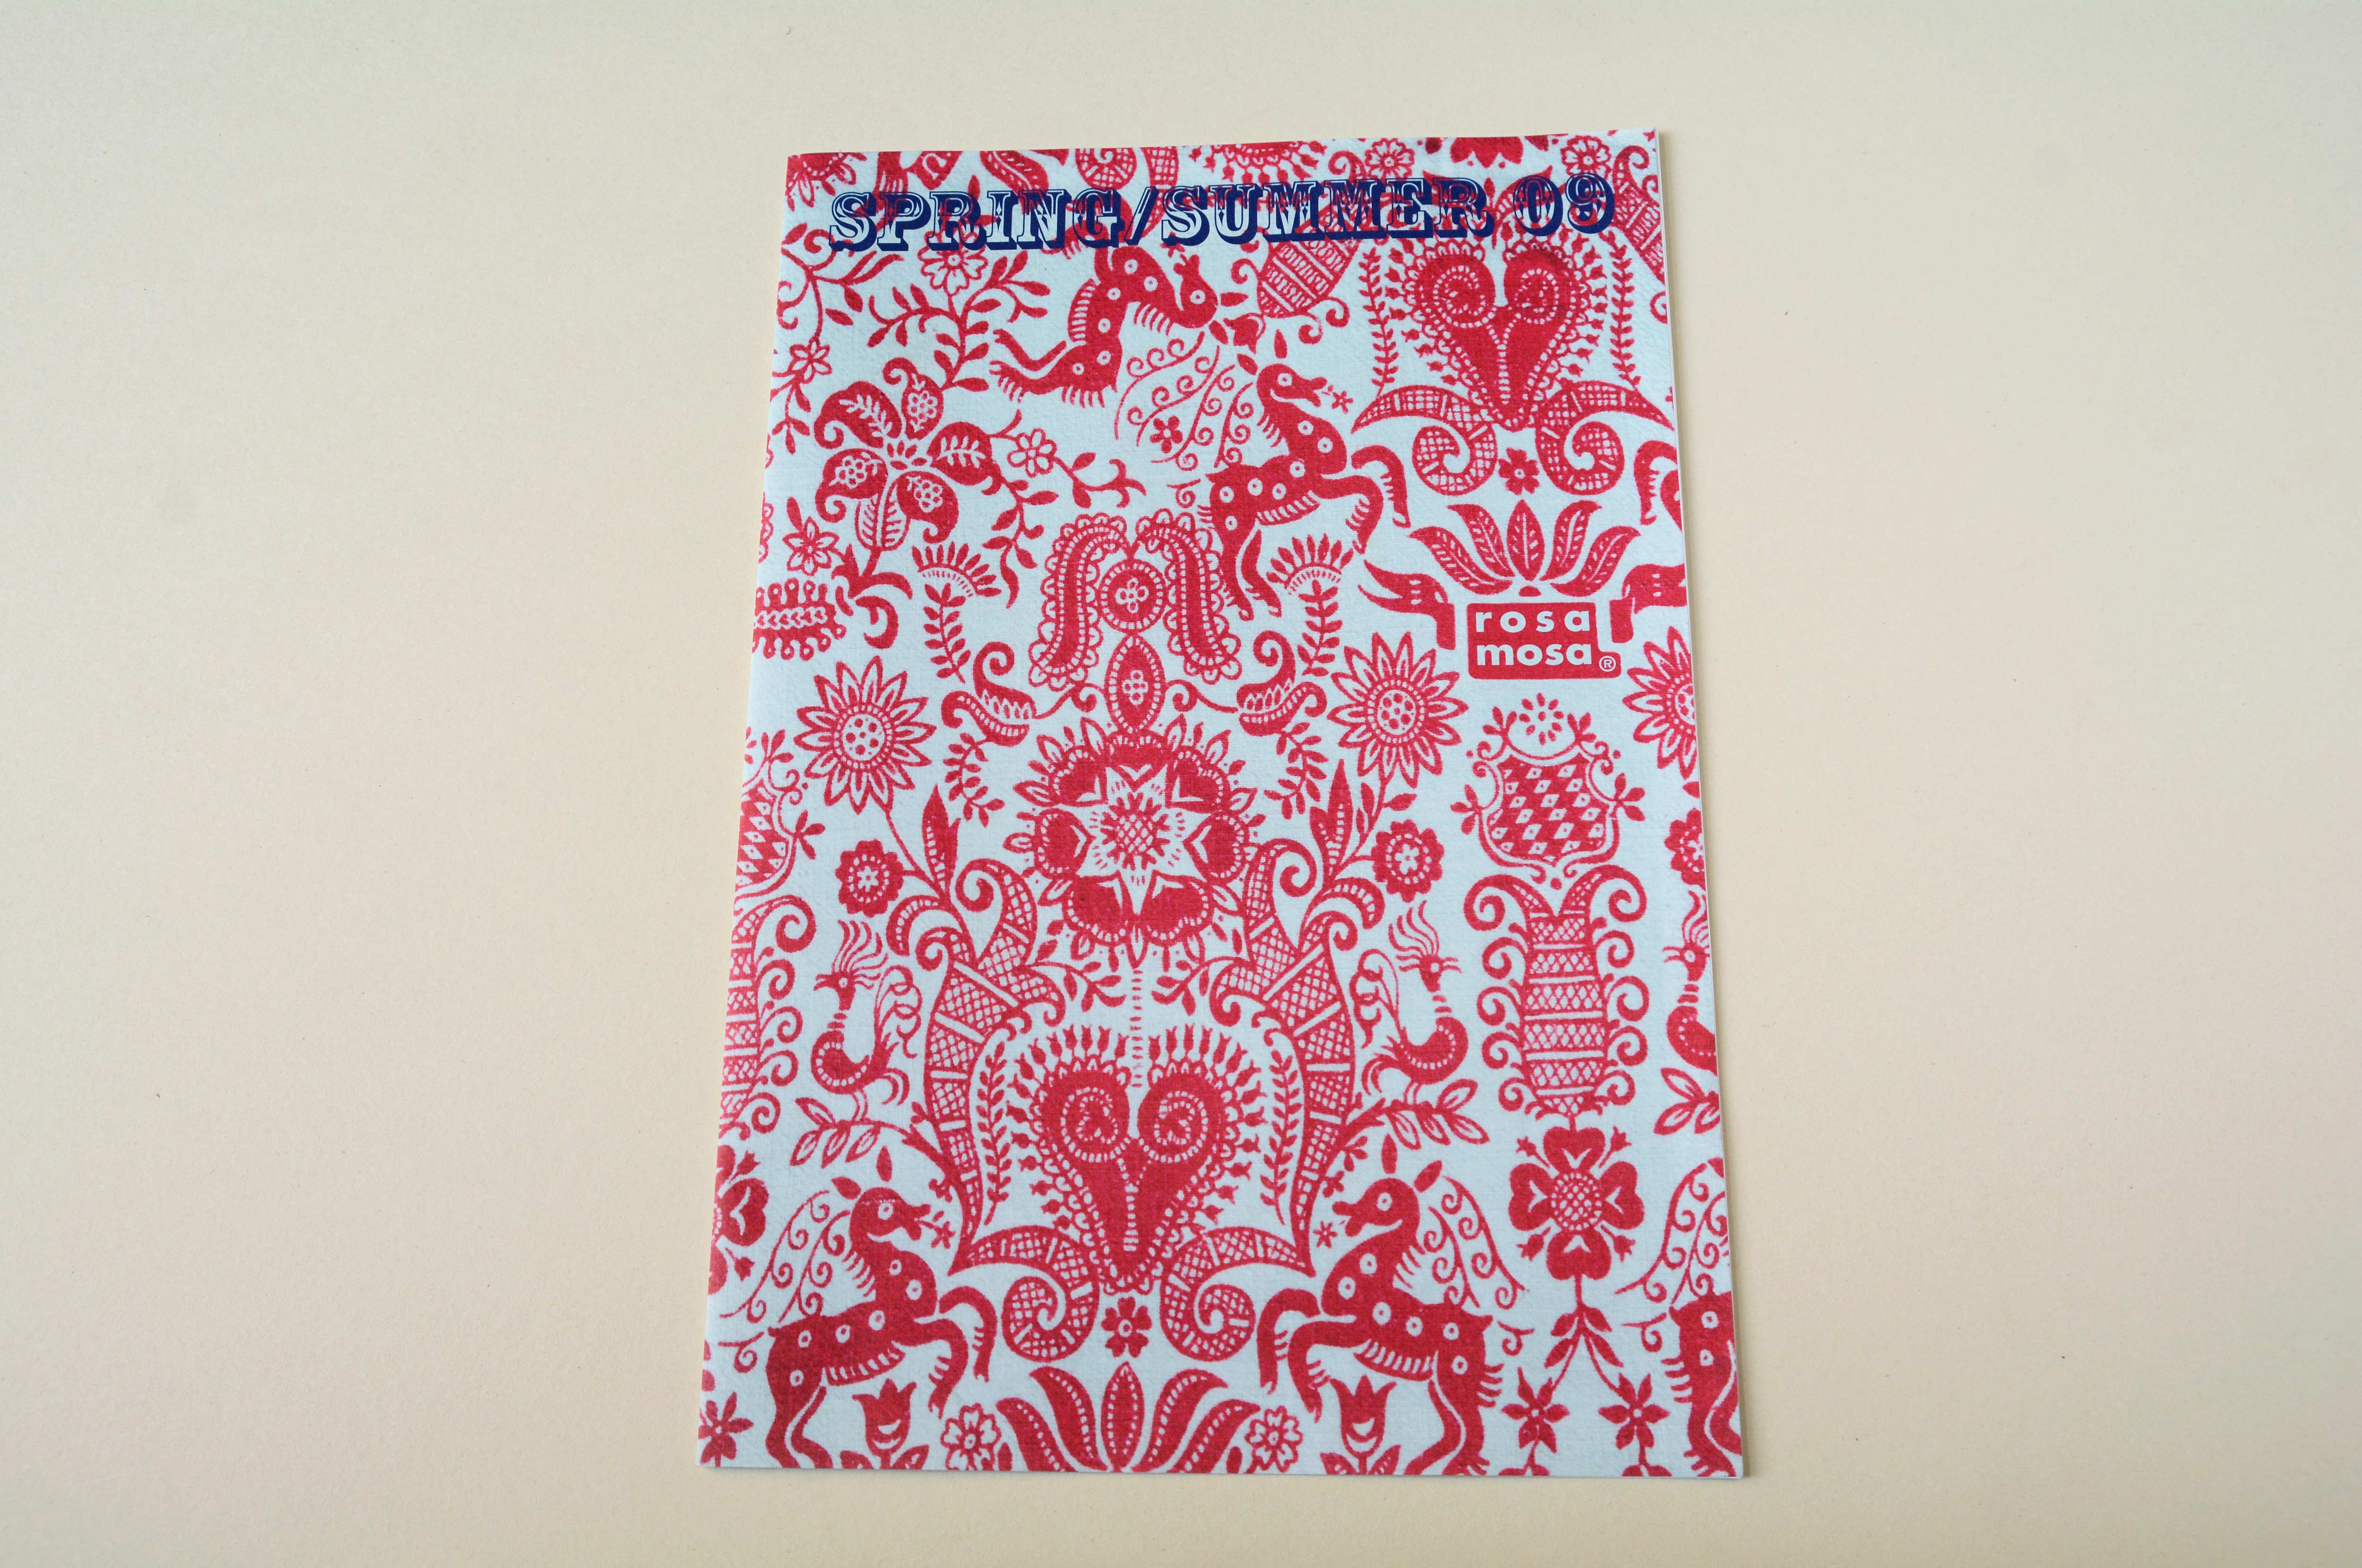 Cover catalogue. Figurative pattern in red with incorporated logo. Blue title font overlayed.